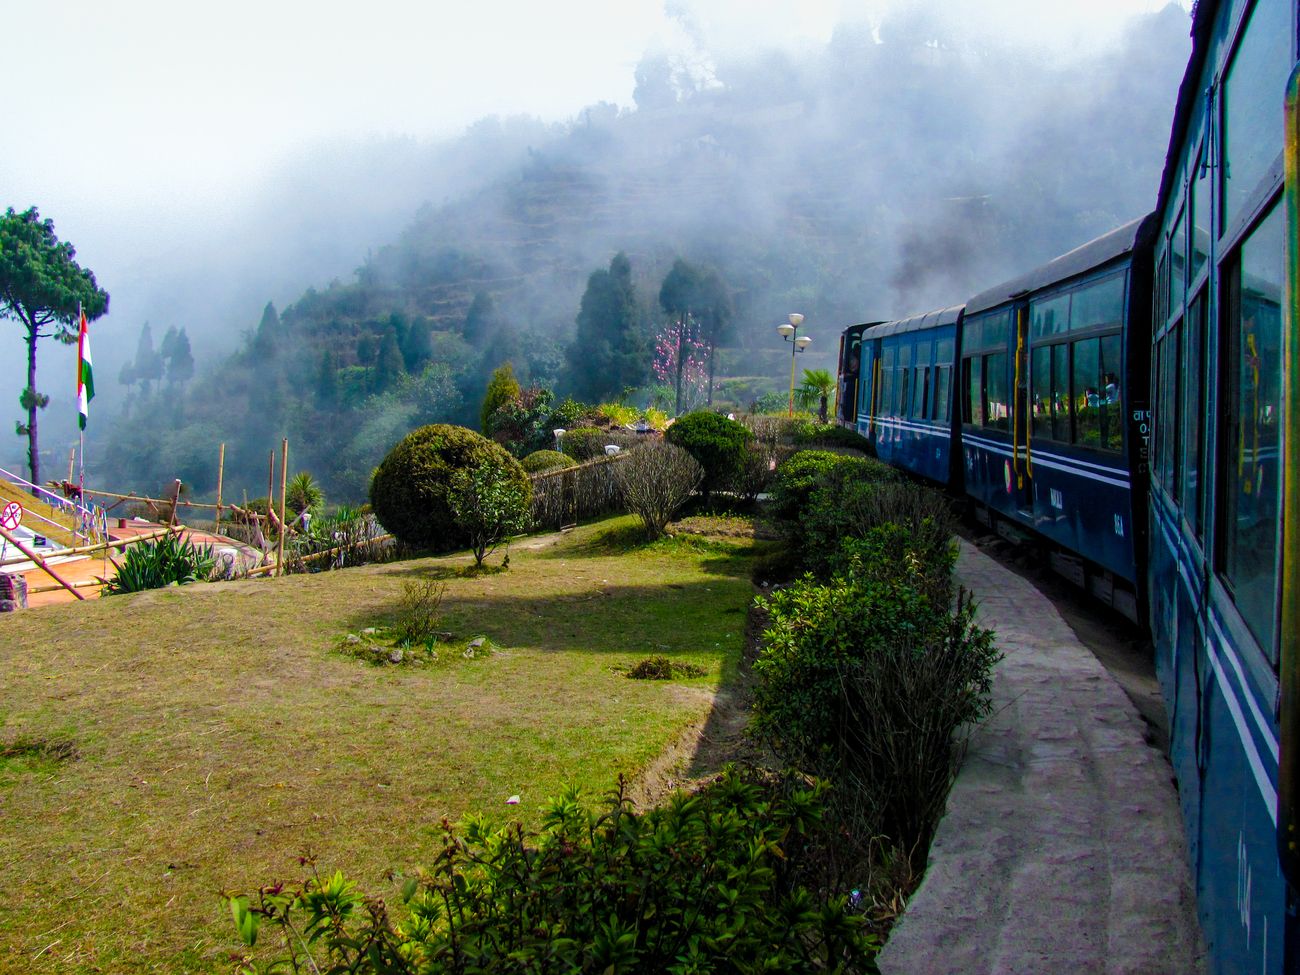 The Darjeeling Toy Train is known for excellent views of gardens and valleys through its course across the picturesque landscape of Darjeeling